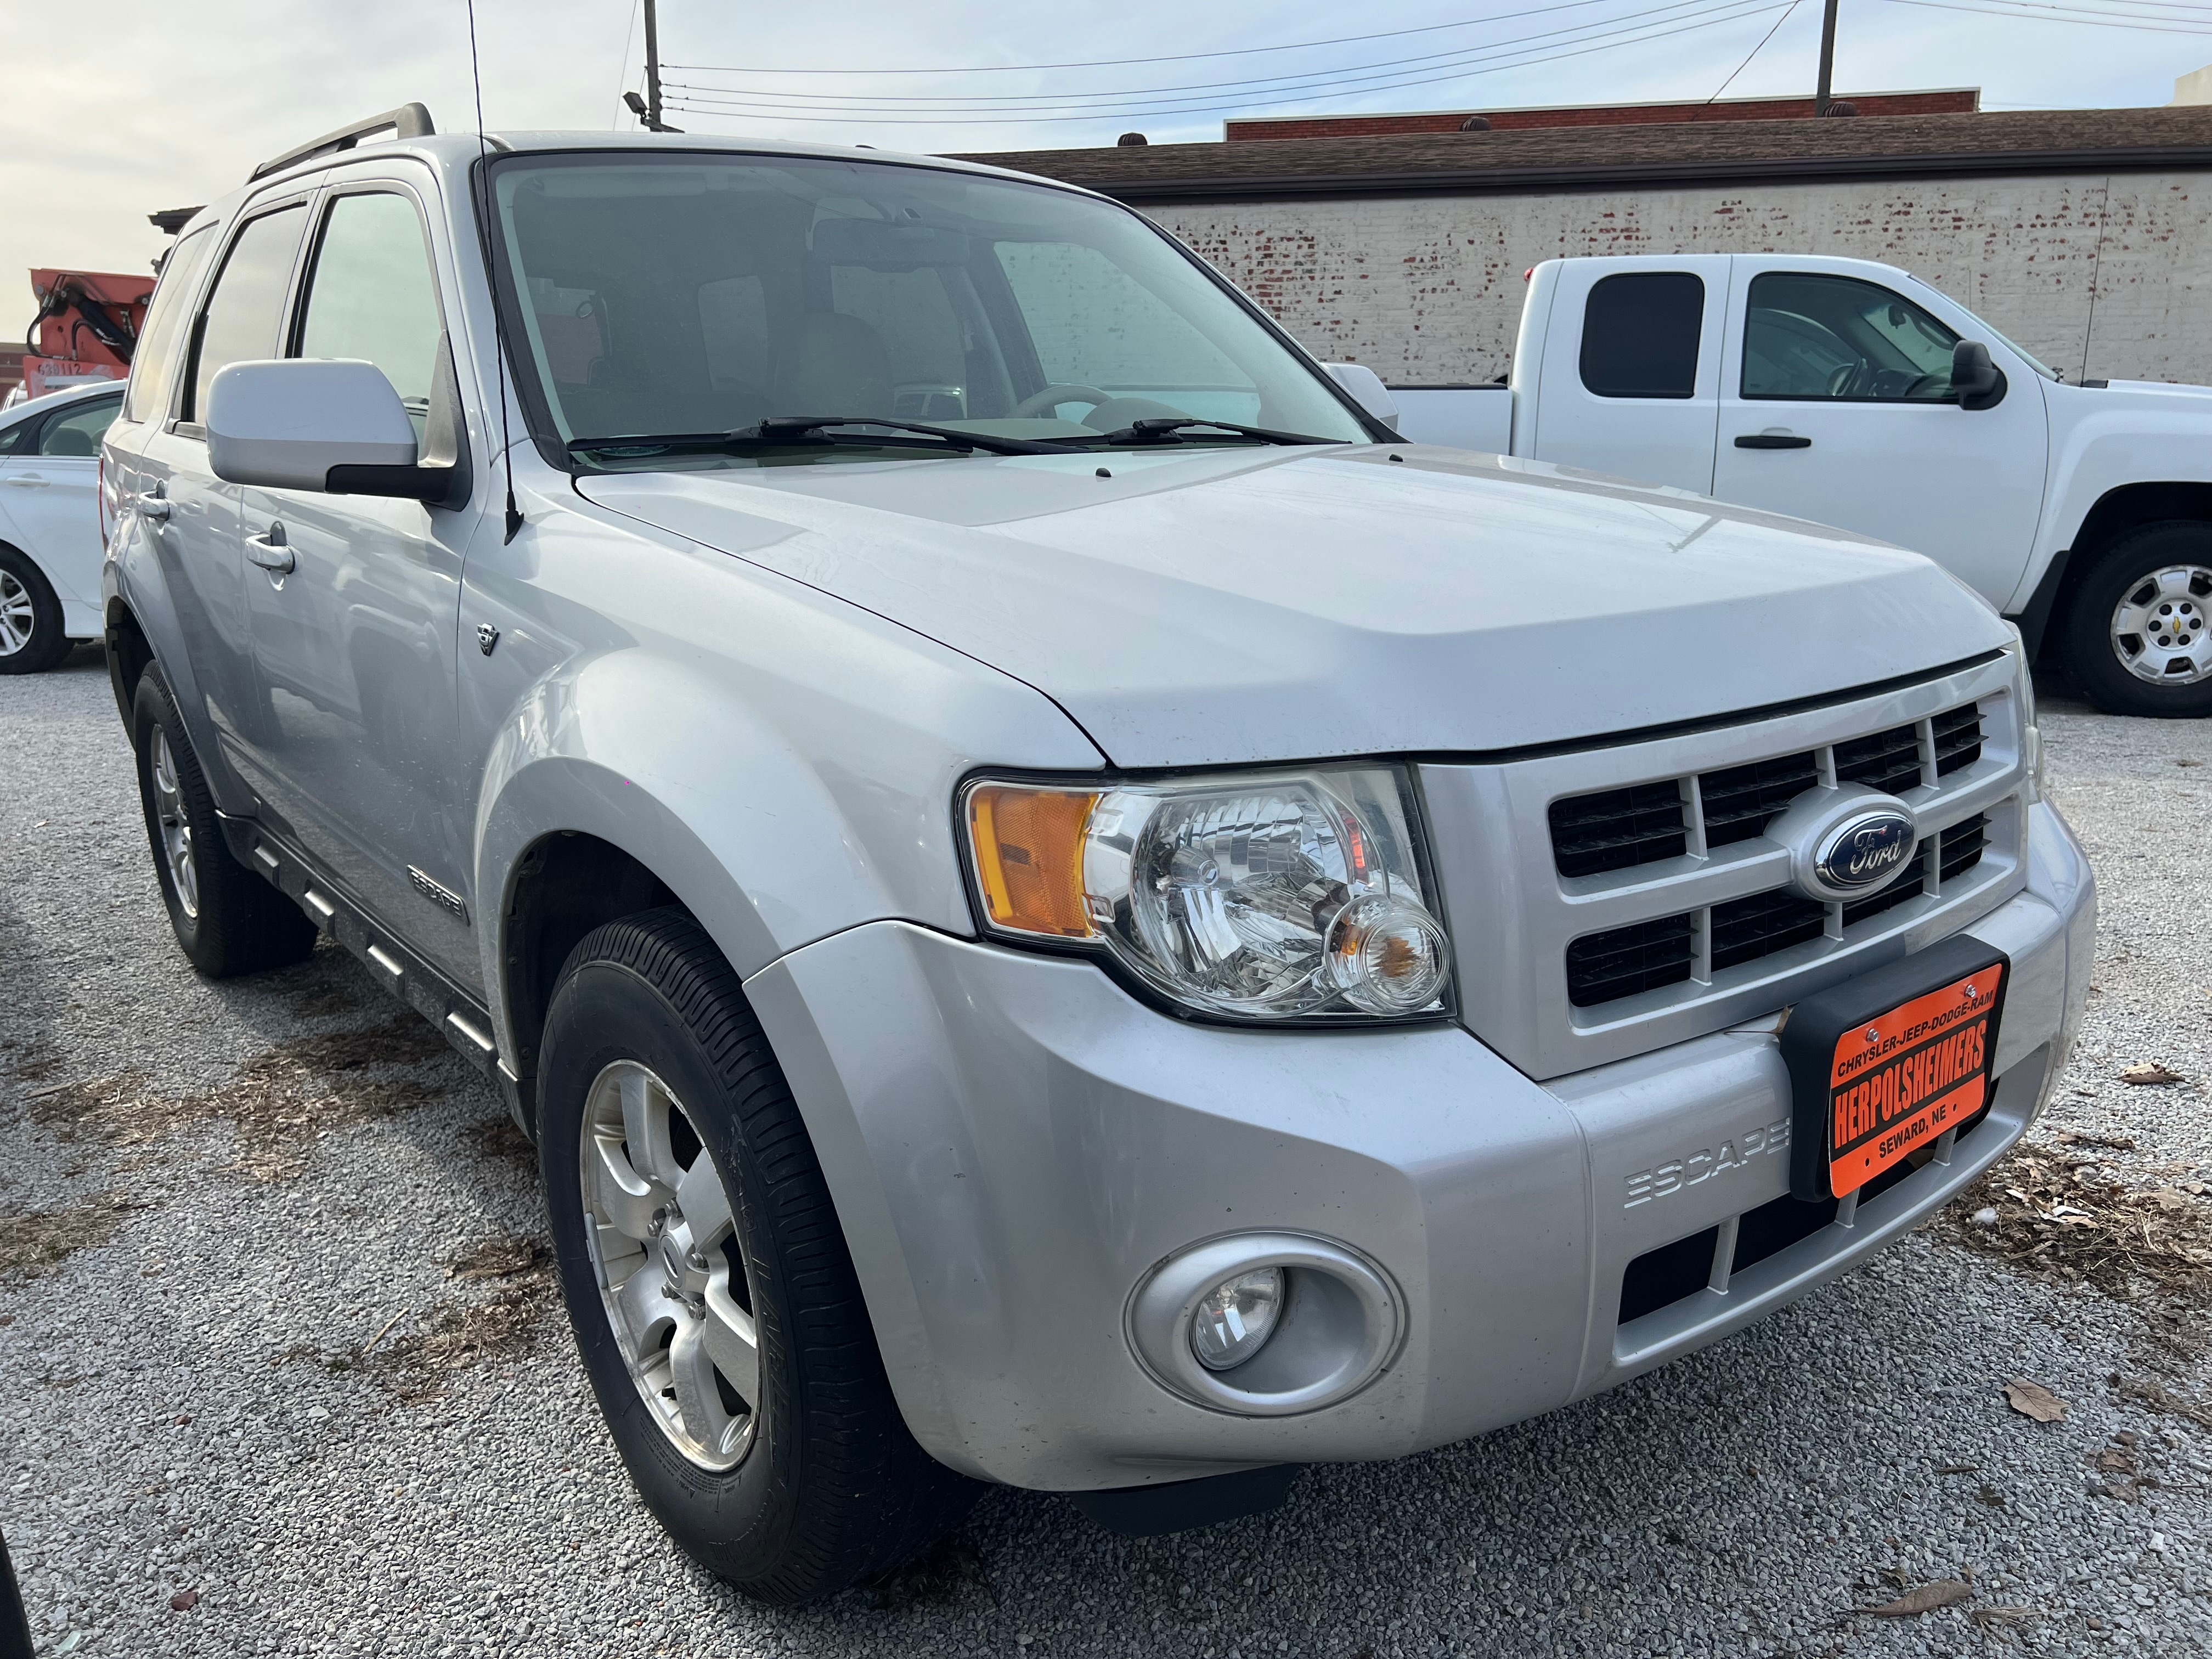 Used 2008 Ford Escape Limited with VIN 1FMCU94168KA83499 for sale in Seward, NE